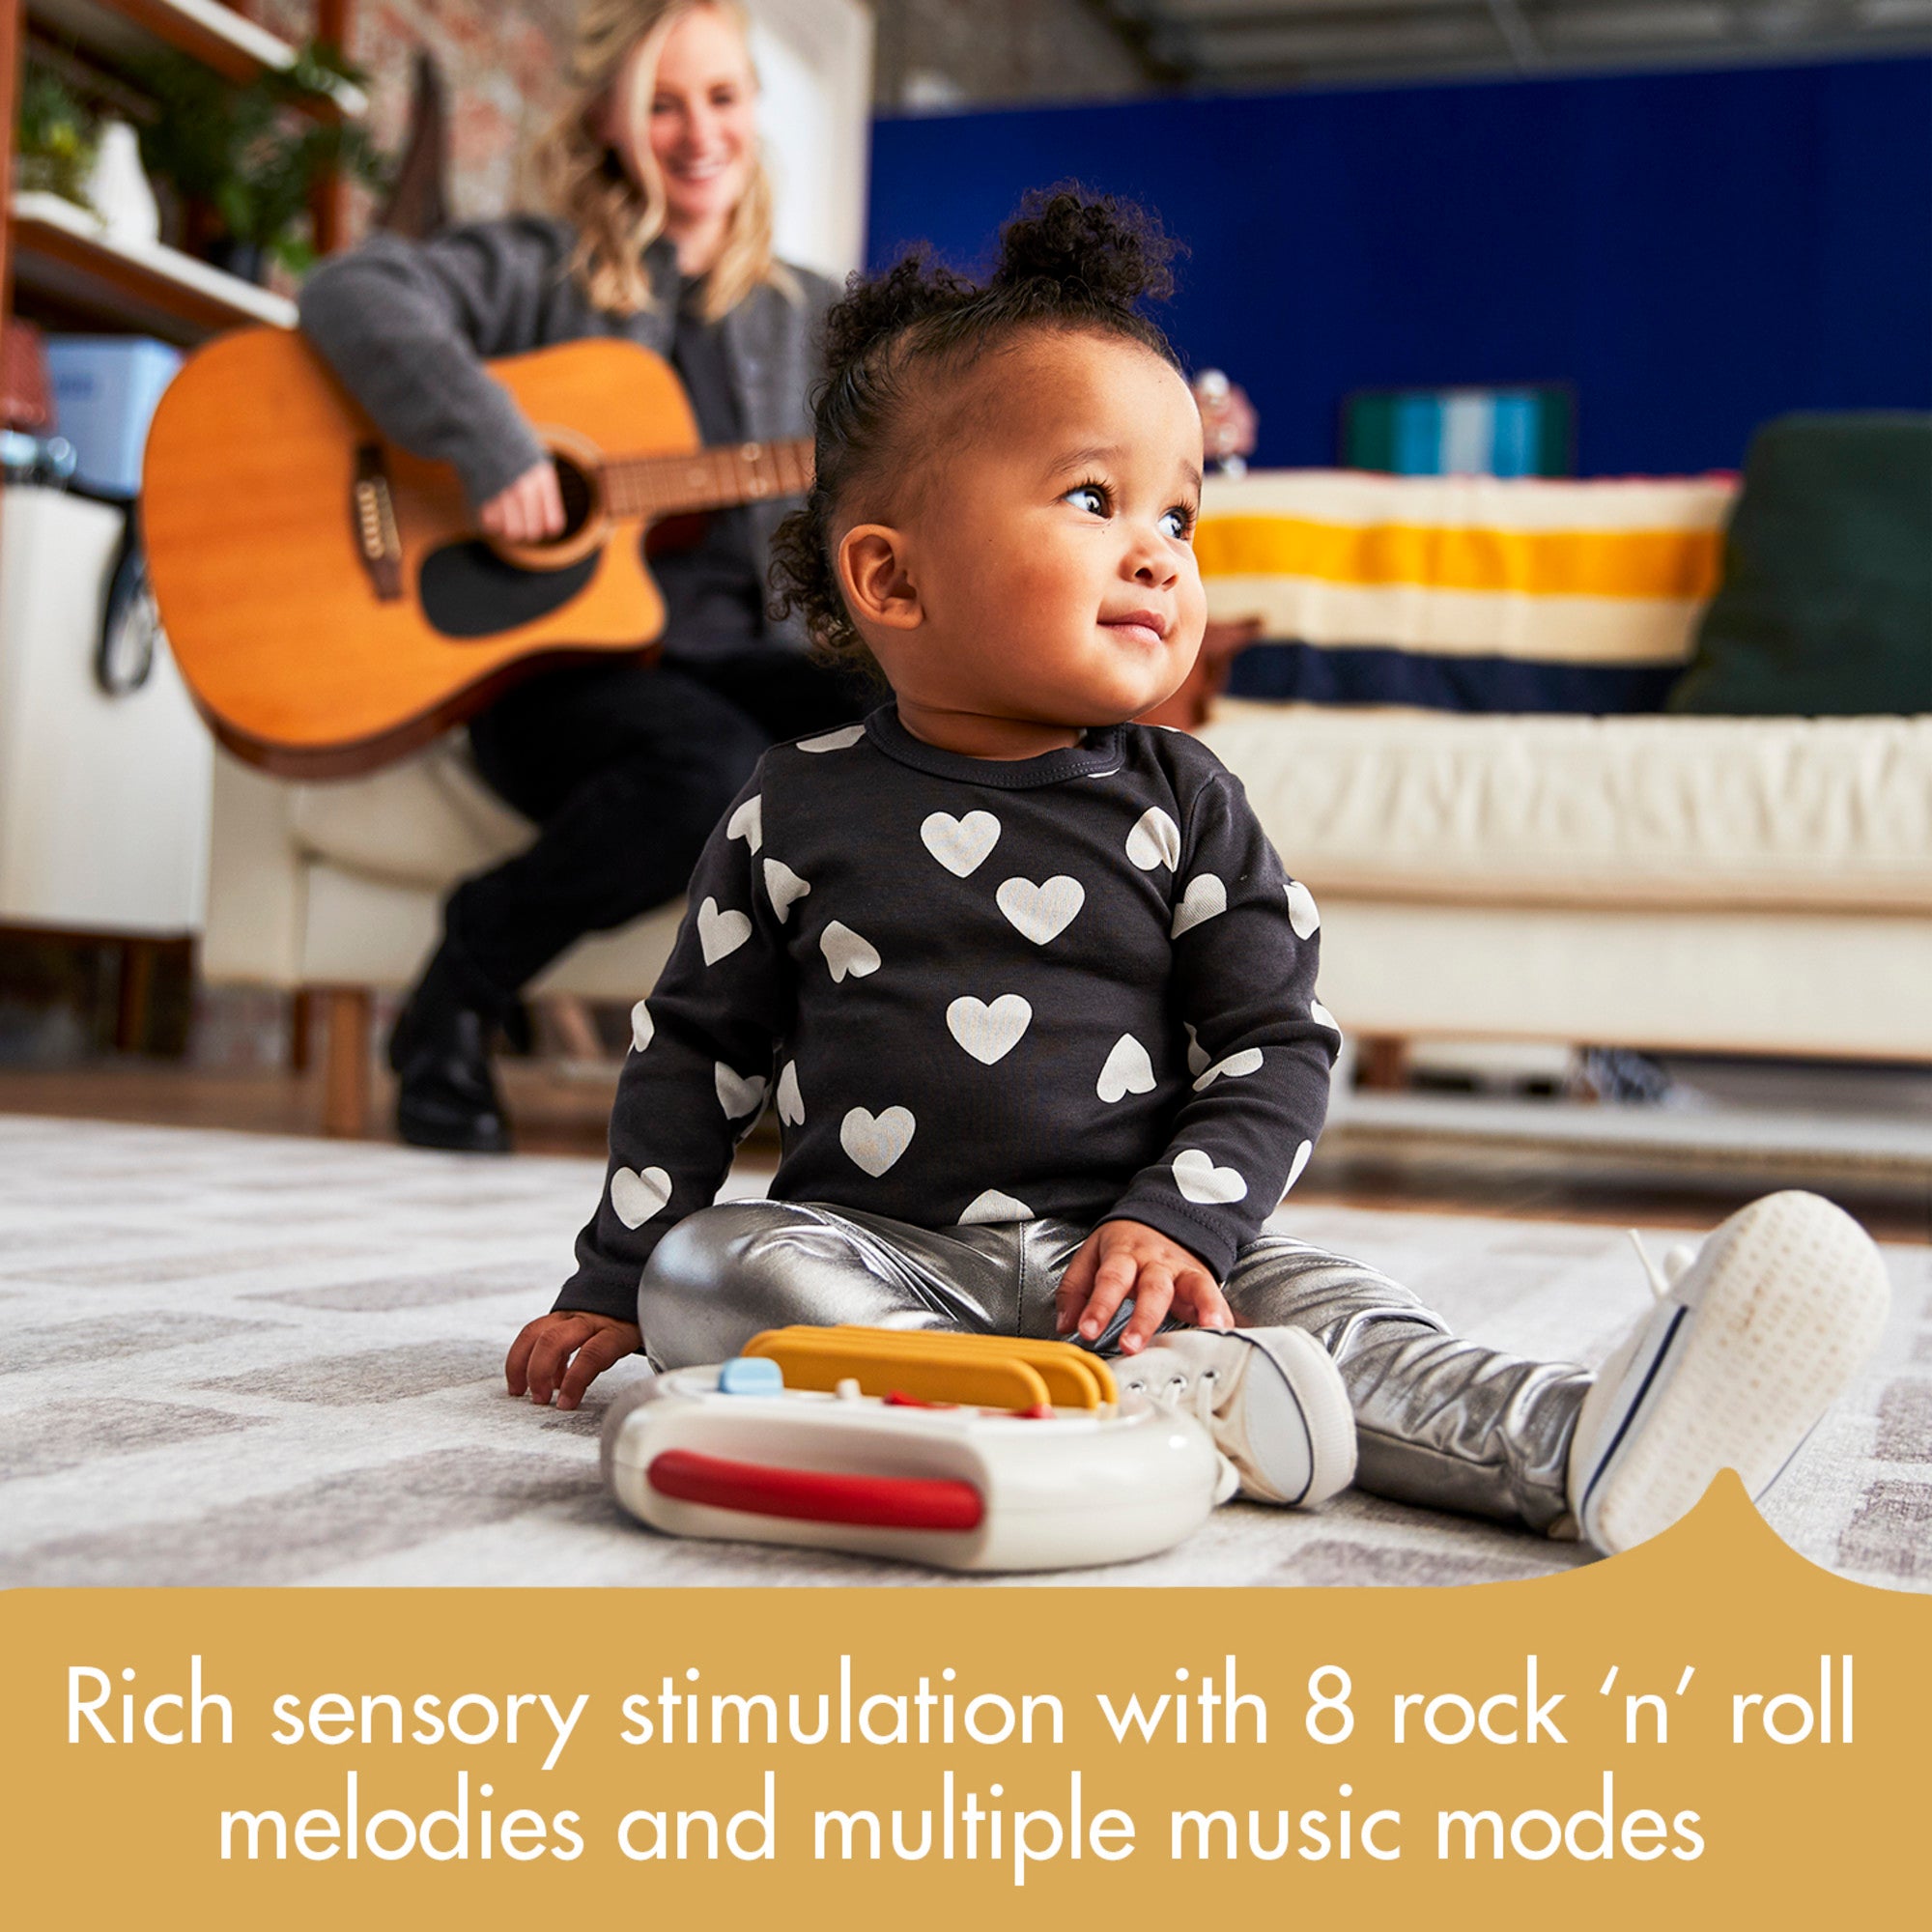 Tiny Rockers Guitar - Created by our experts to nurture your child's development through music and exploration